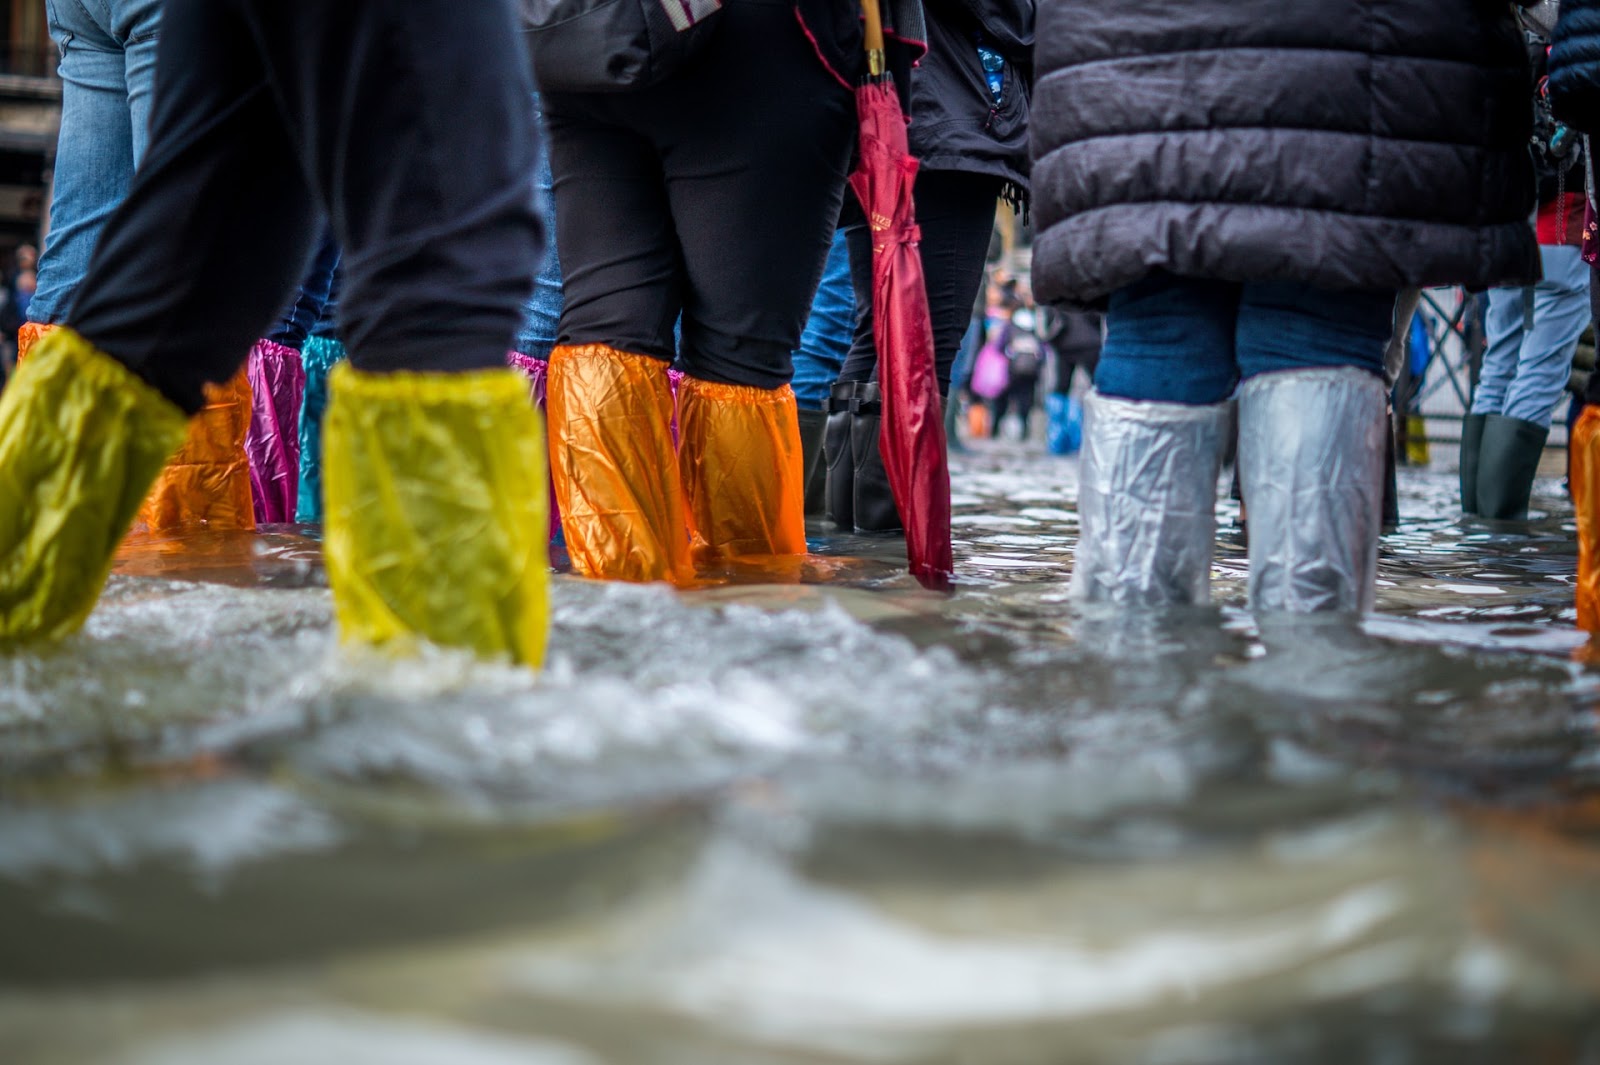 natural disaster, image of floods, people standing in with boots in a flood